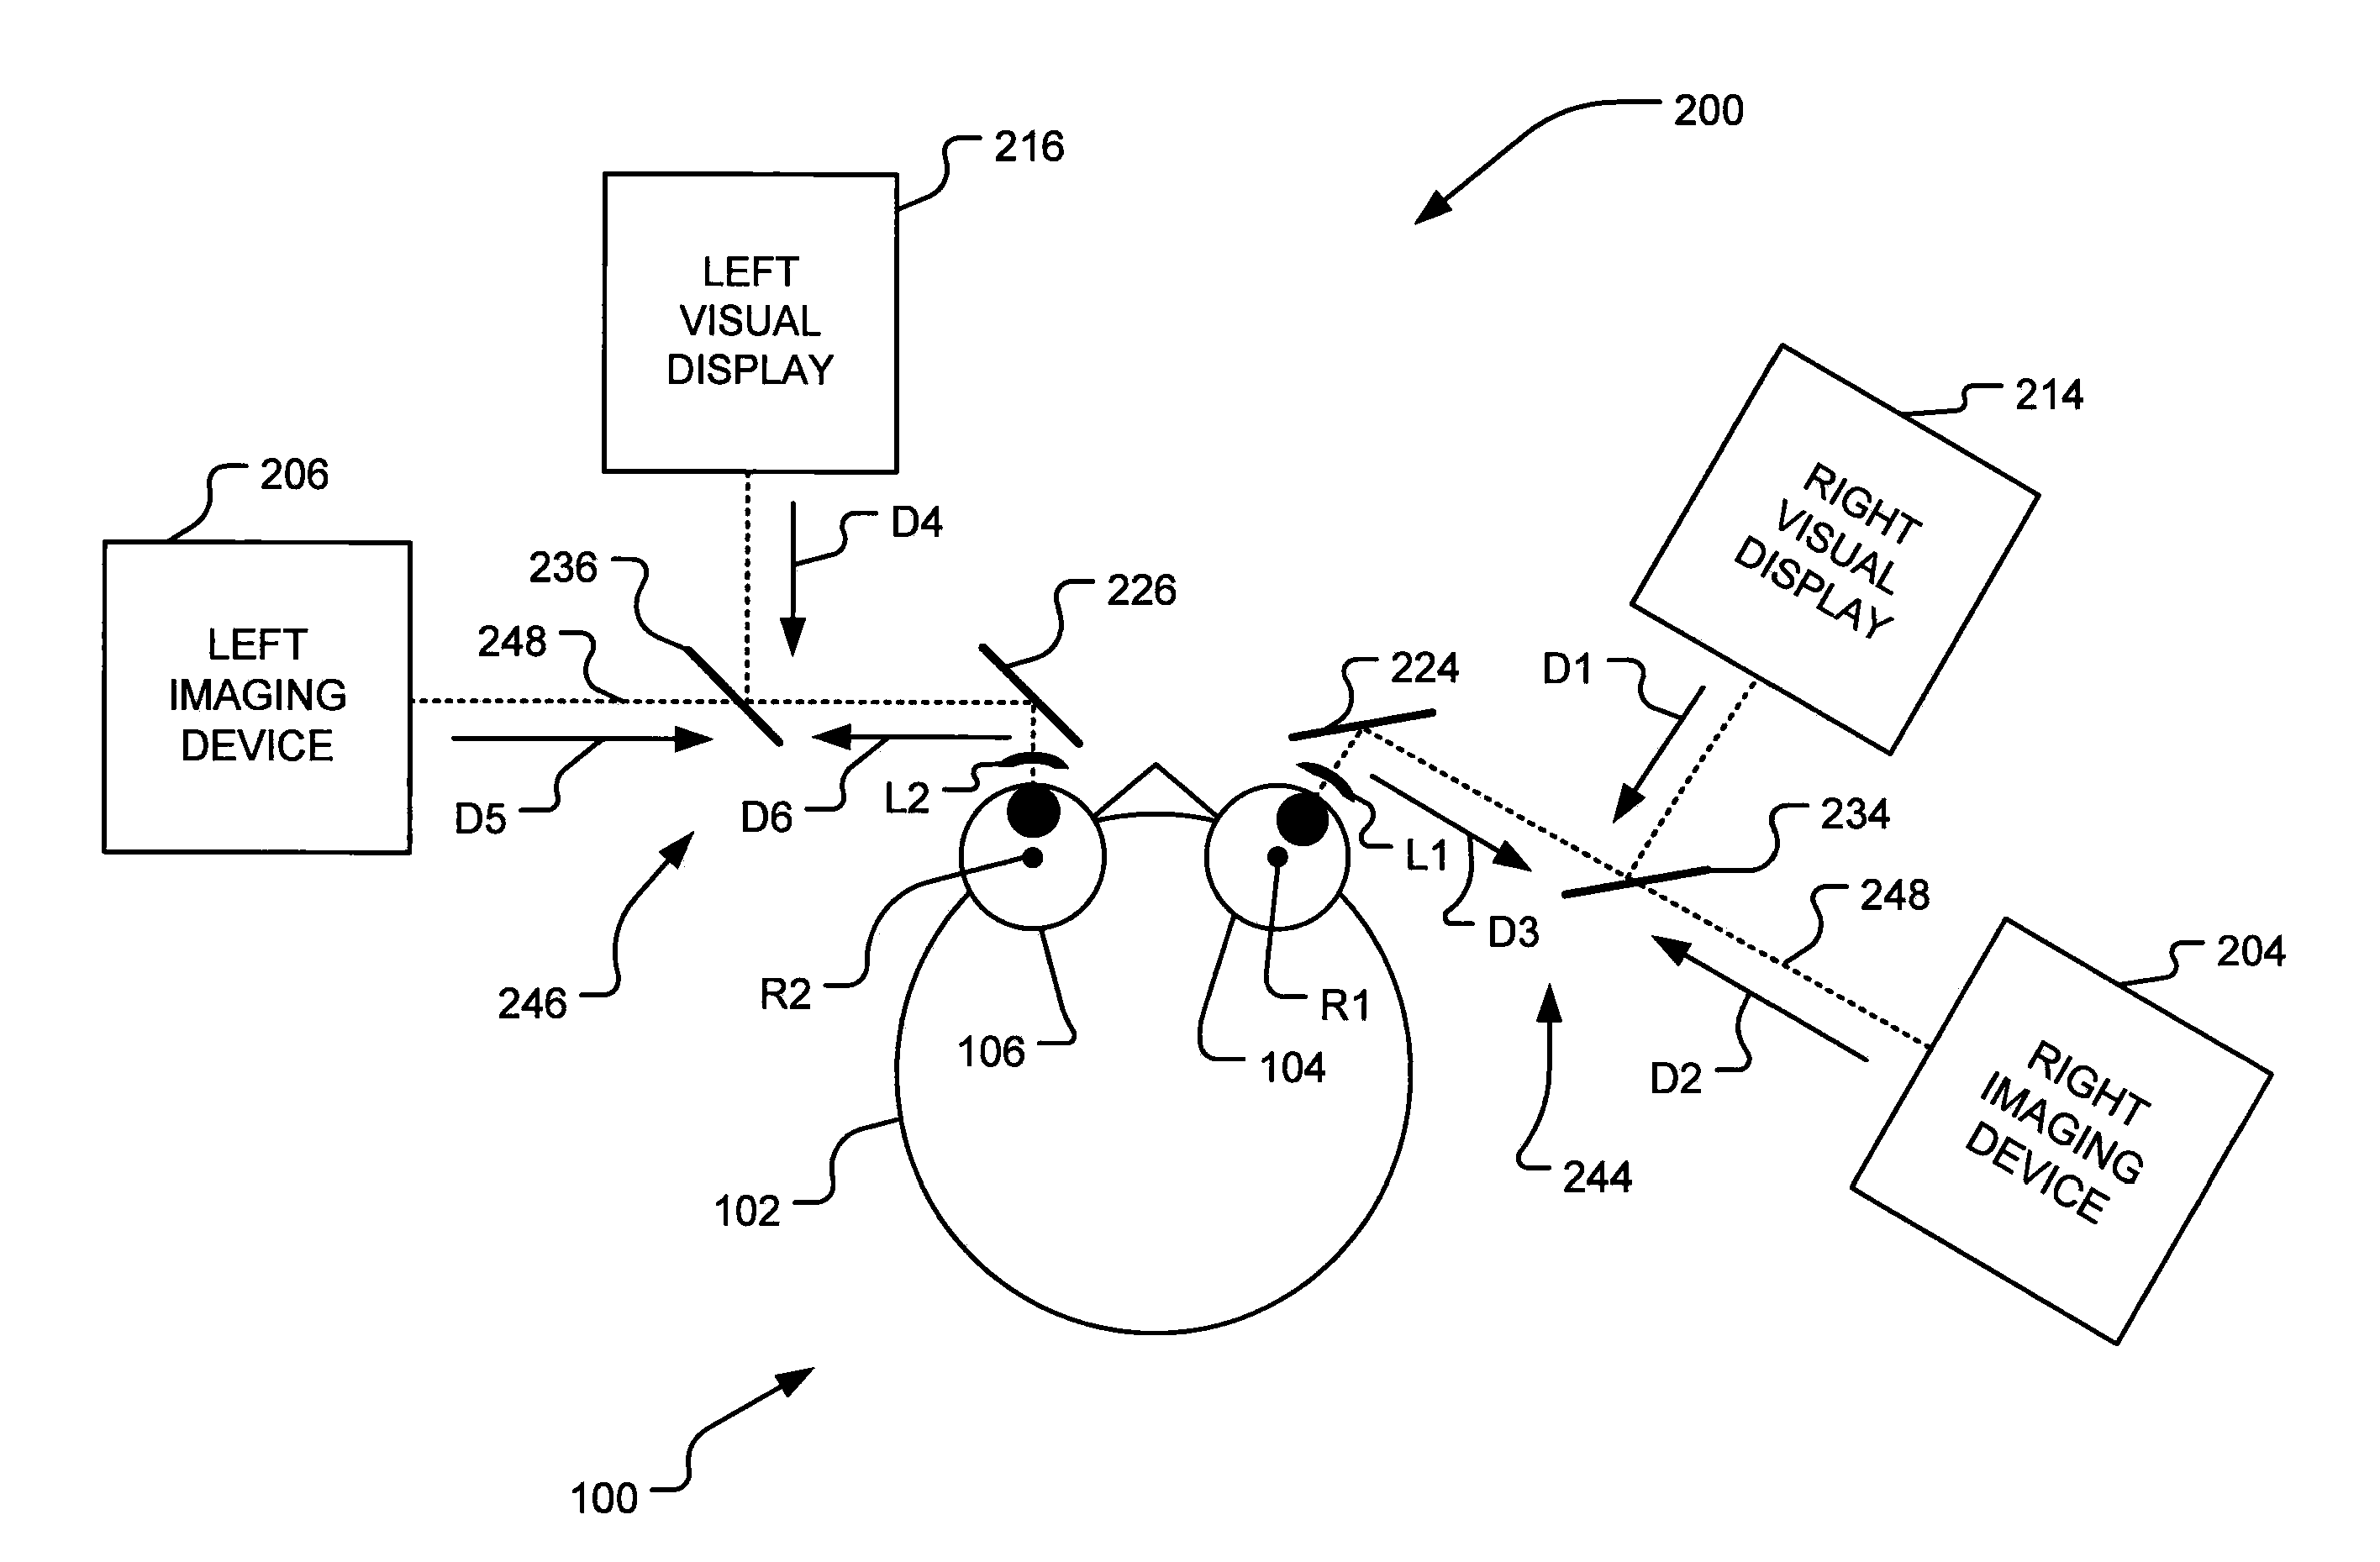 Method and system for treating binocular anomalies